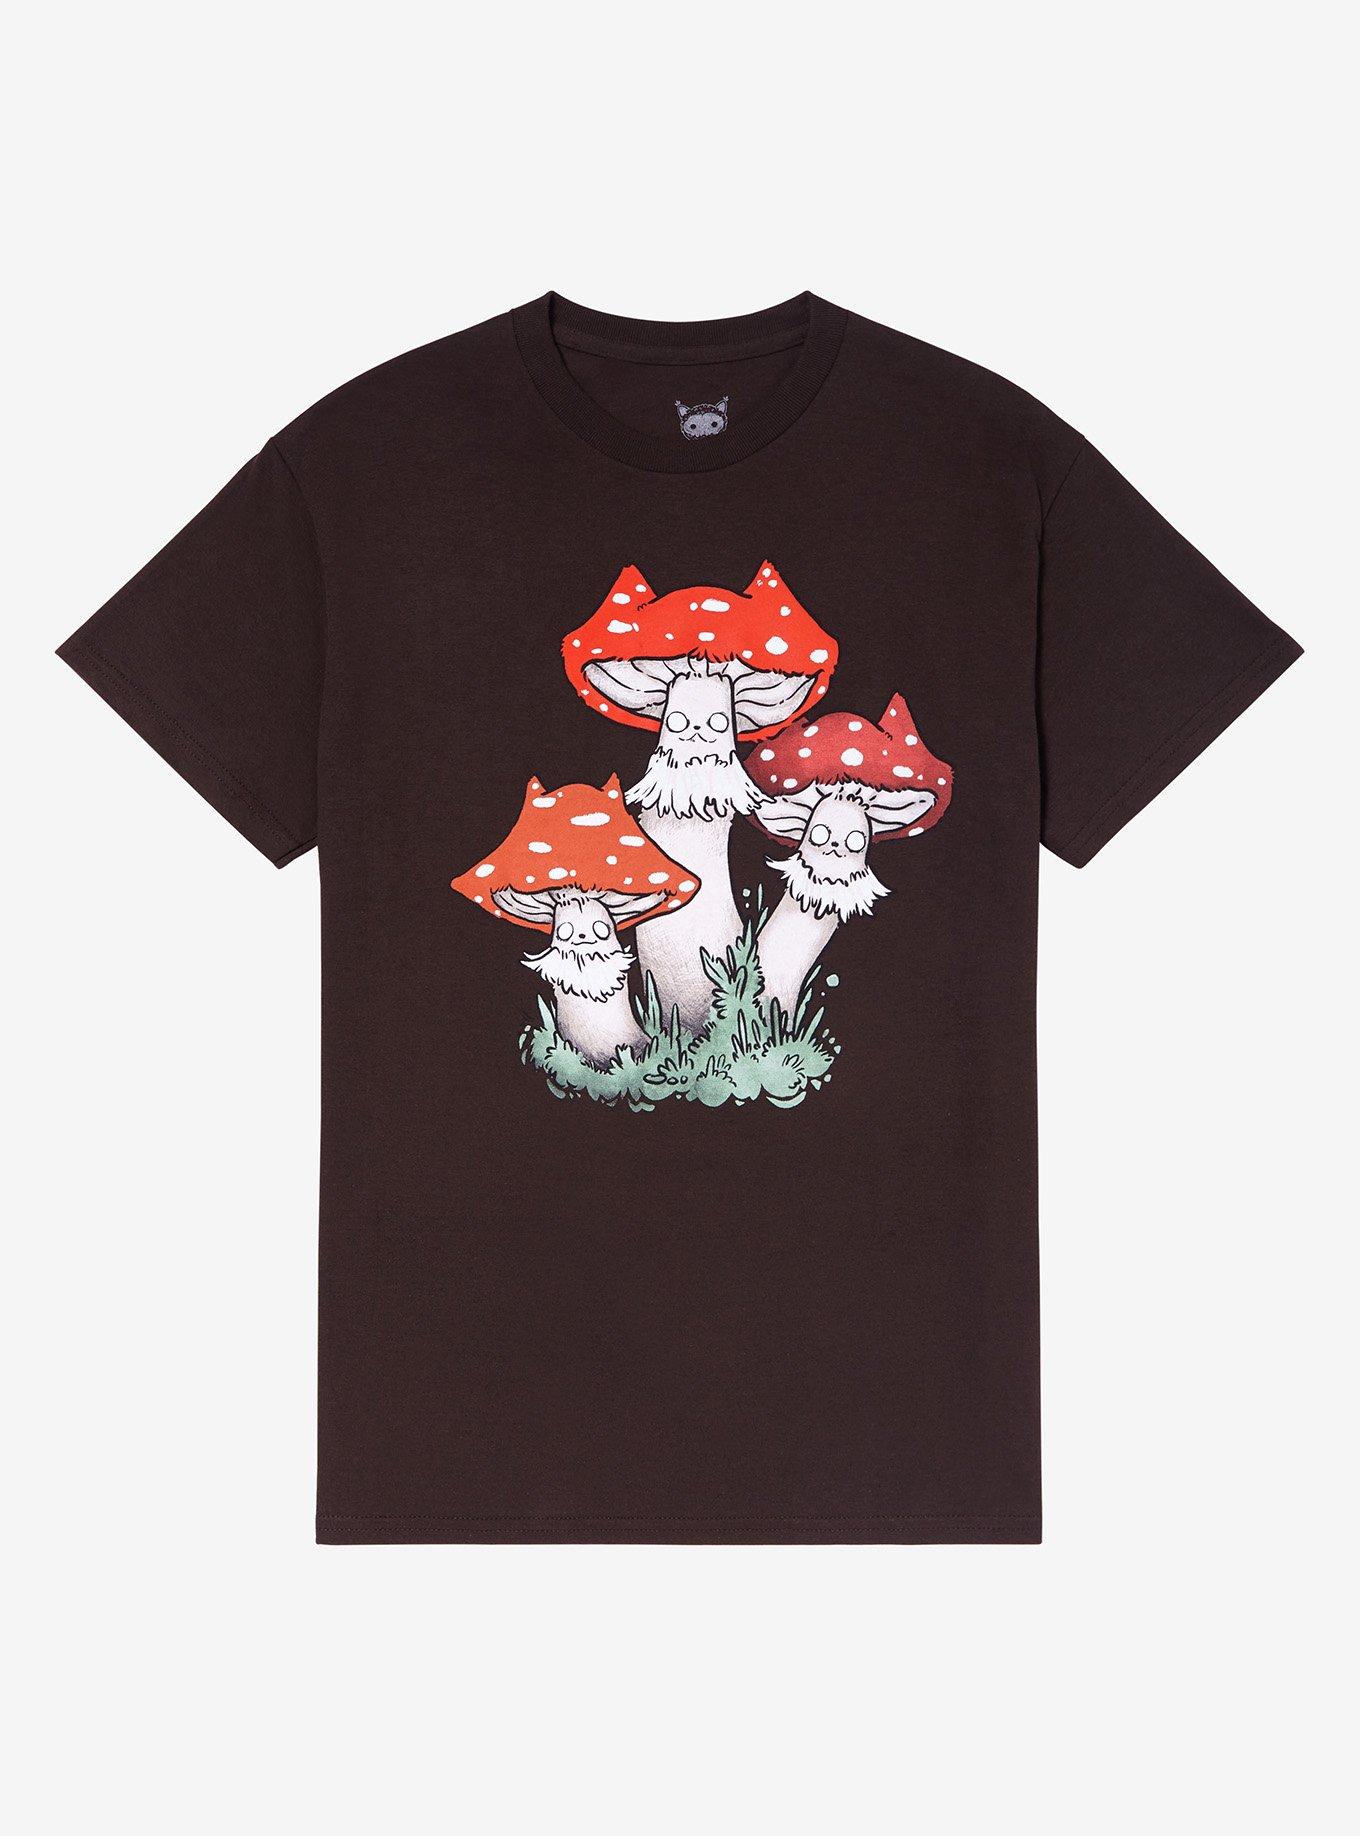 Kitty Mushroom Creature T-Shirt By Guild Of Calamity, BROWN, hi-res